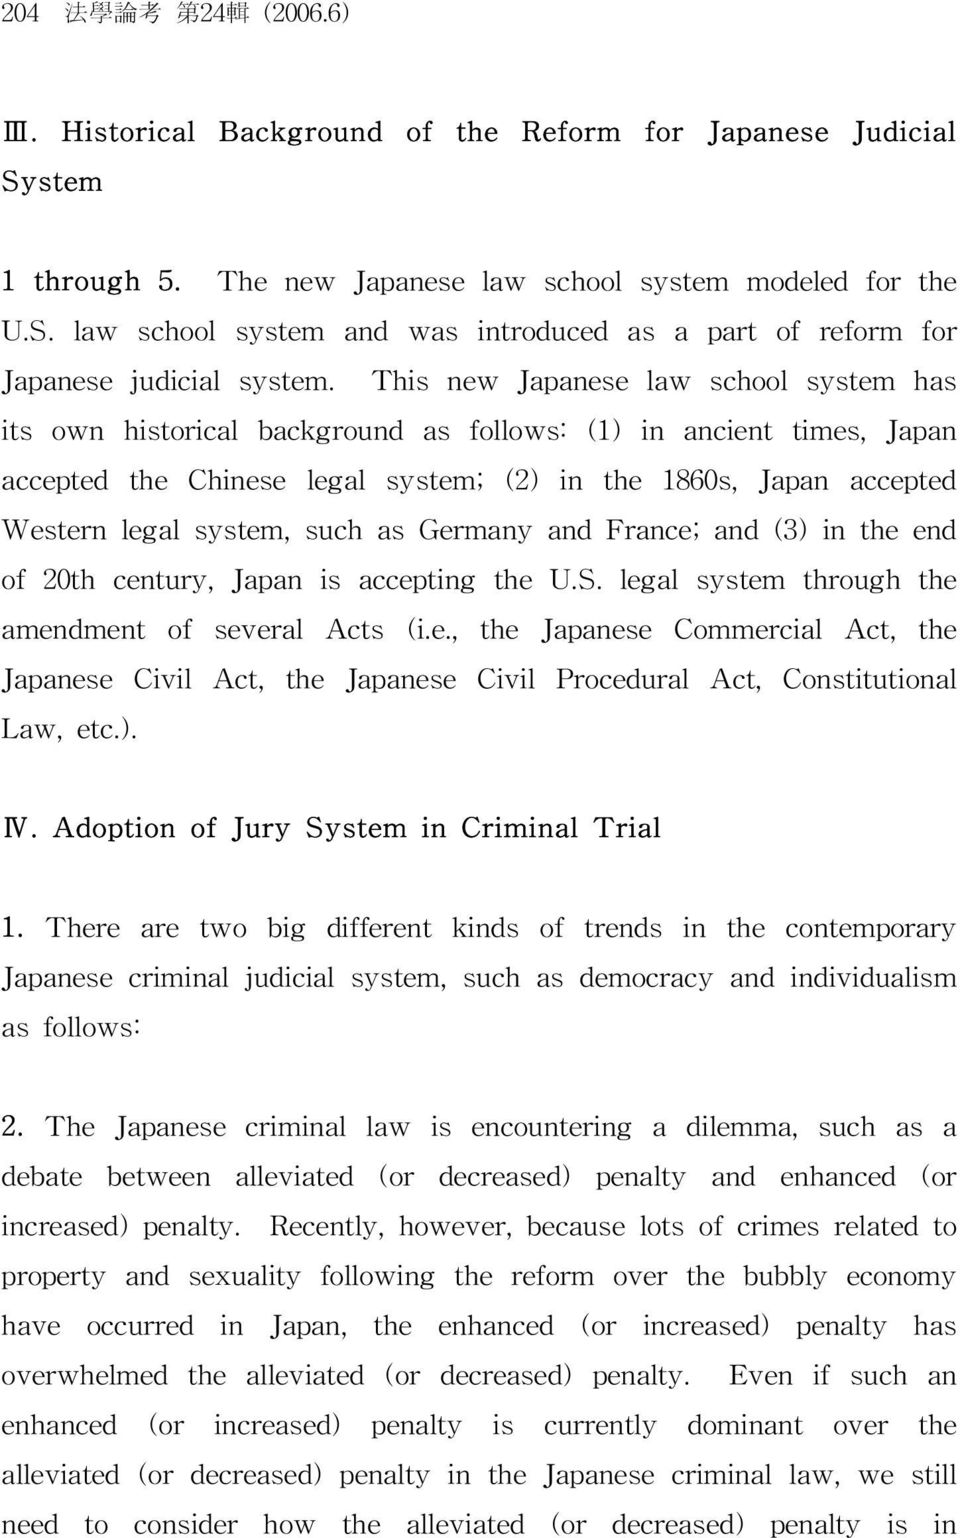 such as Germany and France; and (3) in the end of 20th century, Japan is accepting the U.S. legal system through the amendment of several Acts (i.e., the Japanese Commercial Act, the Japanese Civil Act, the Japanese Civil Procedural Act, Constitutional Law, etc.